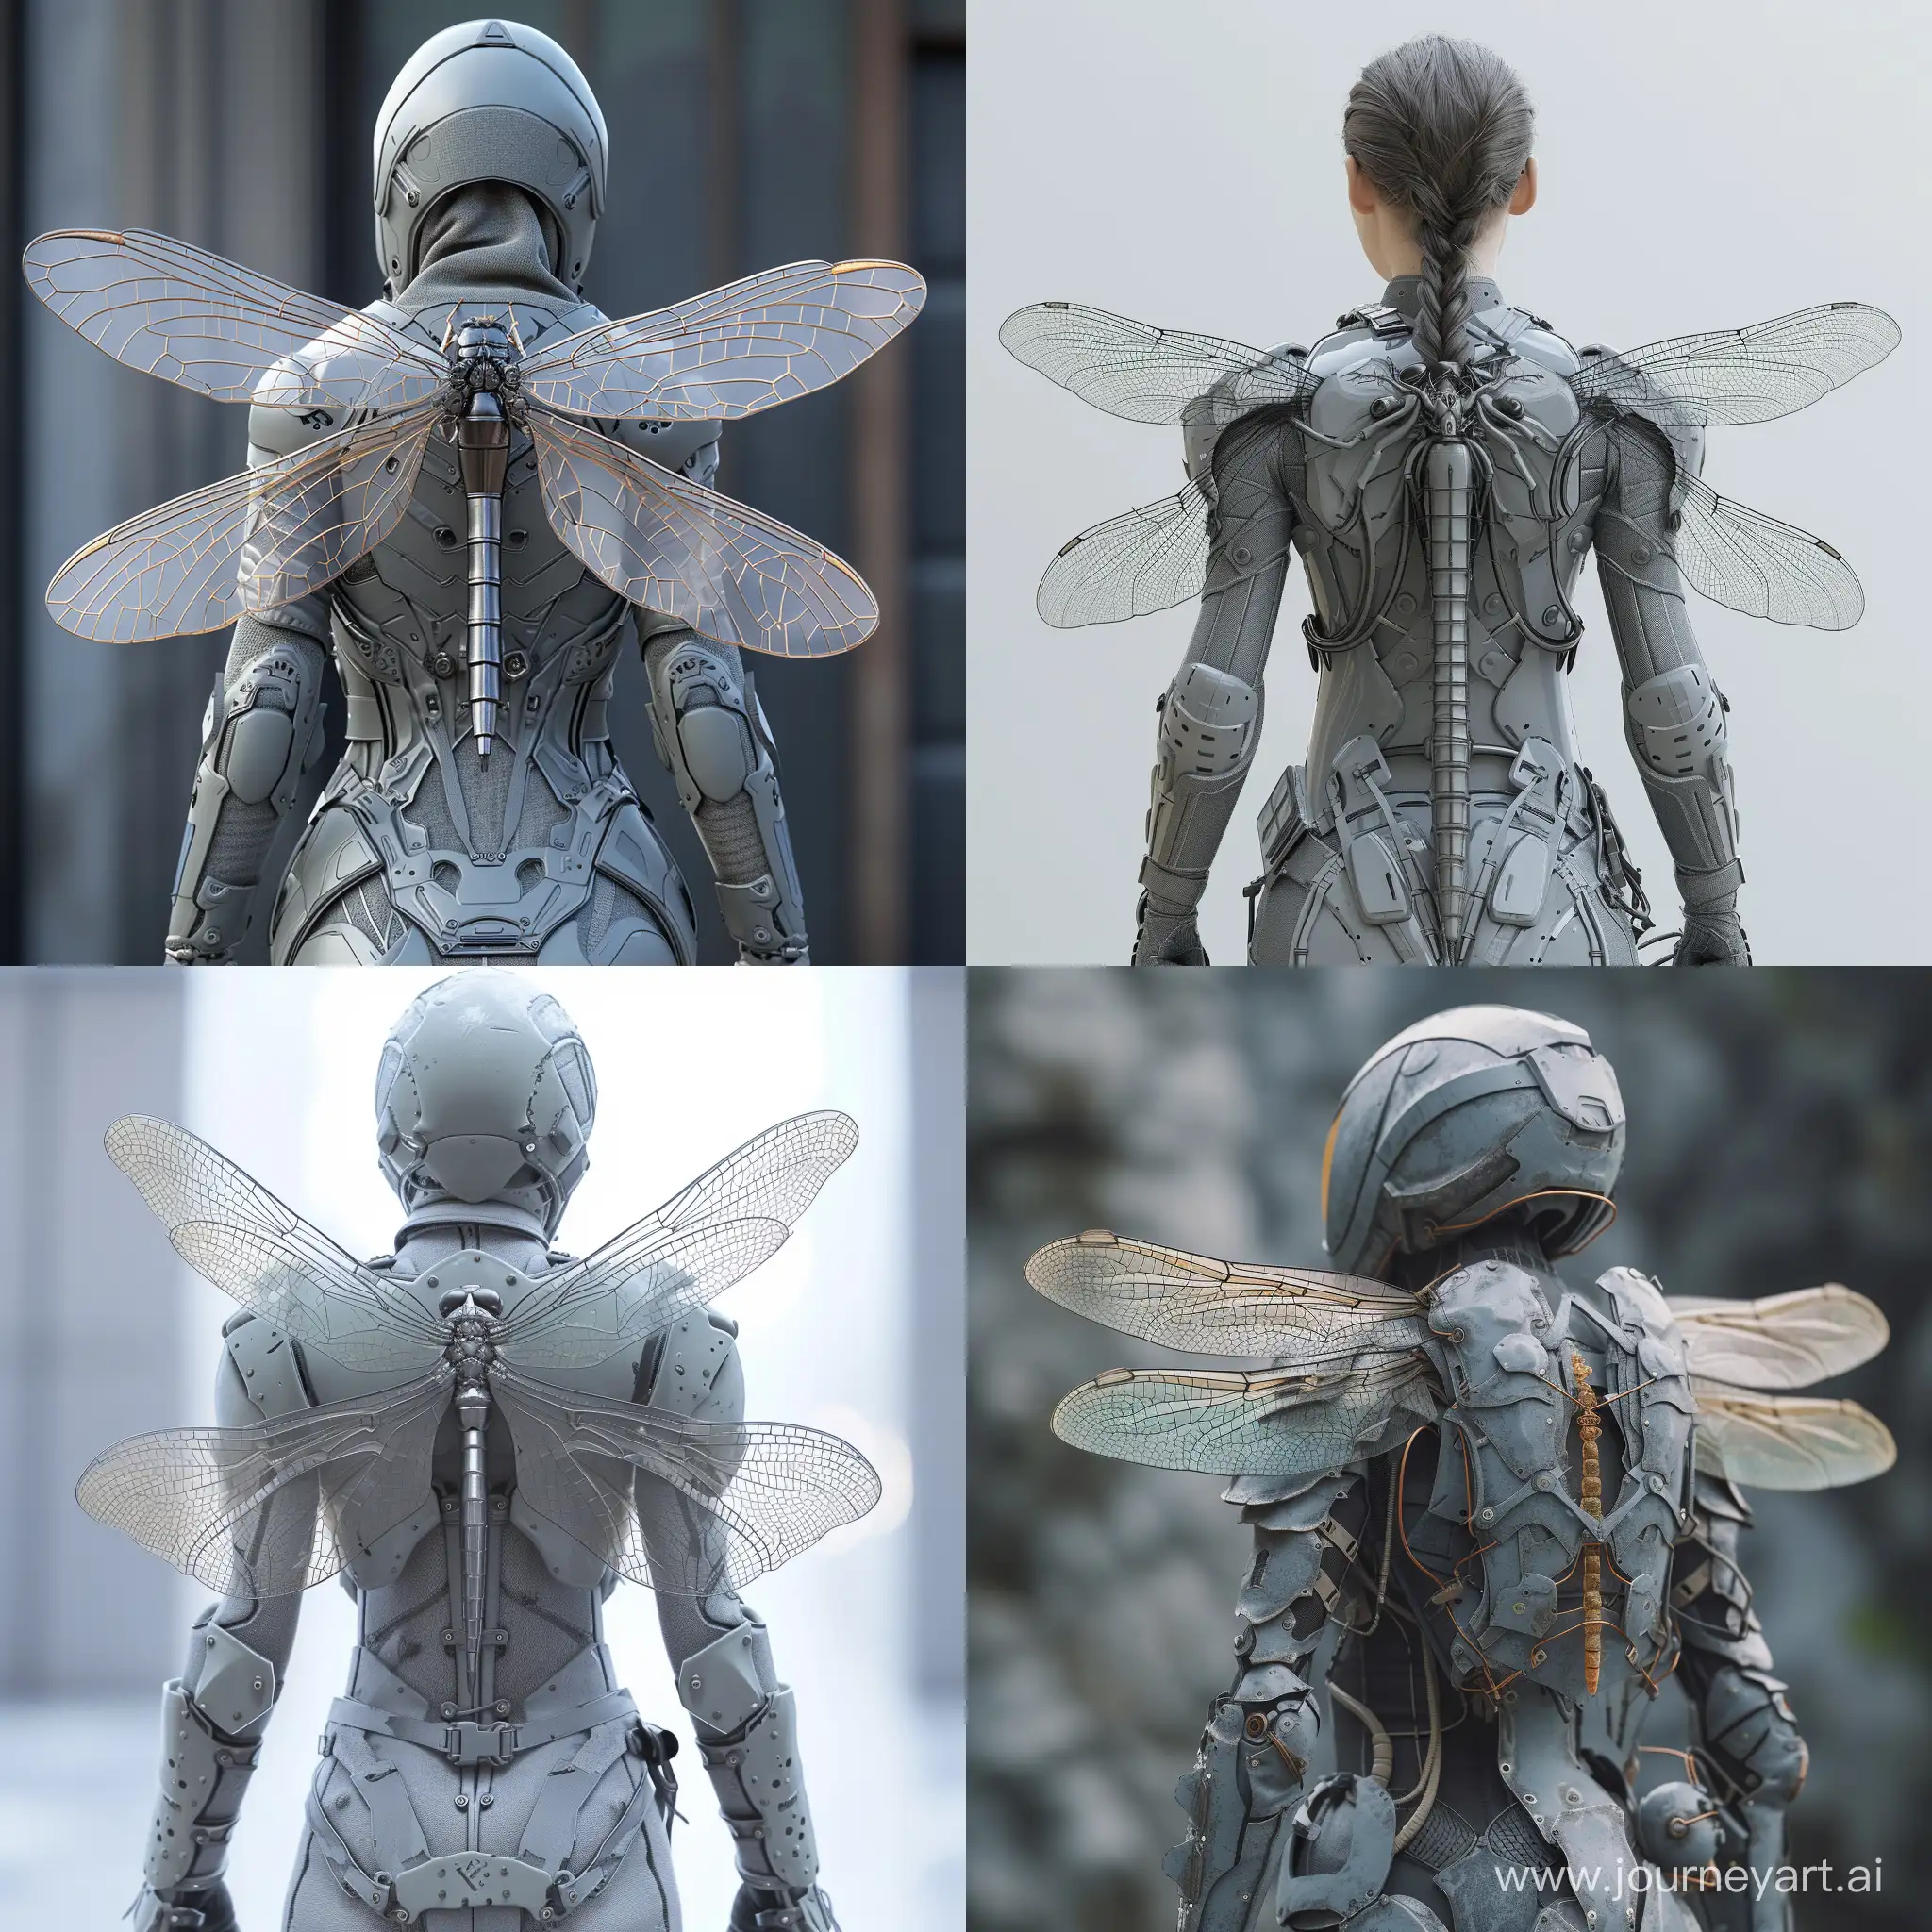 Futuristic-Female-Warrior-in-Gray-Reinforced-Armor-with-BioTech-Dragonfly-Wings